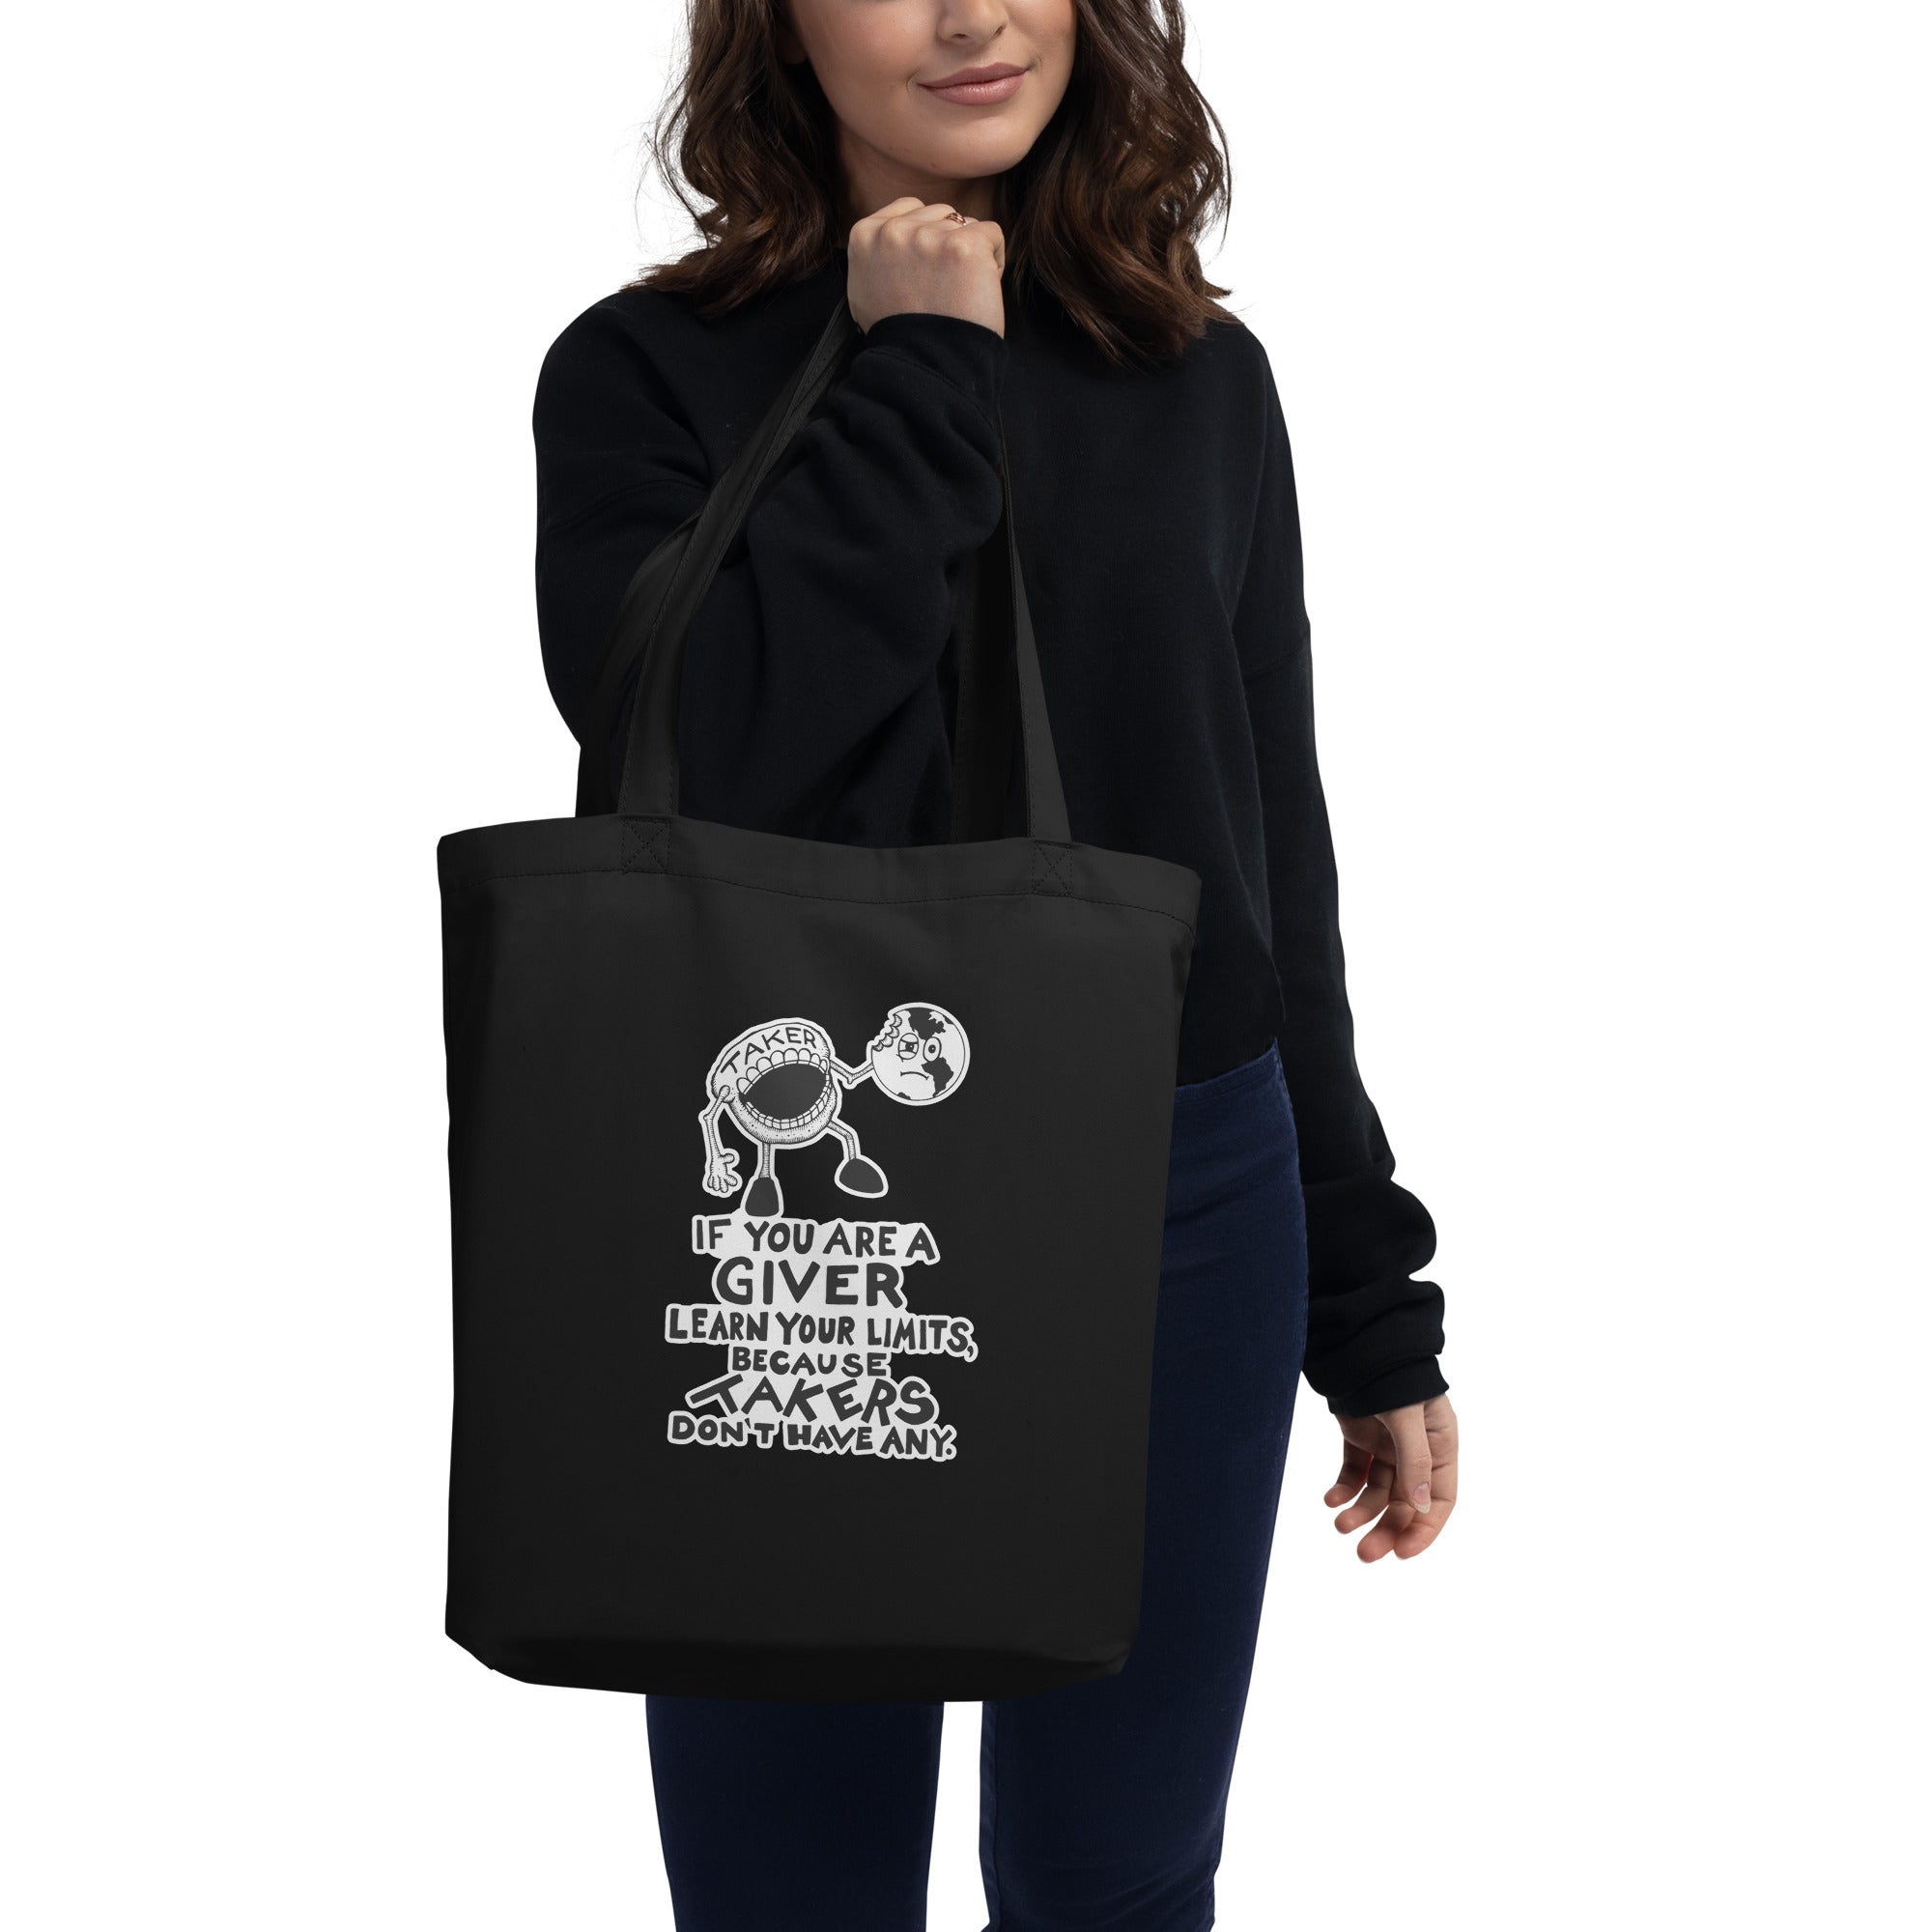 The Taker Organic Cotton Tote Bag In Black By Artist Rick Frausto